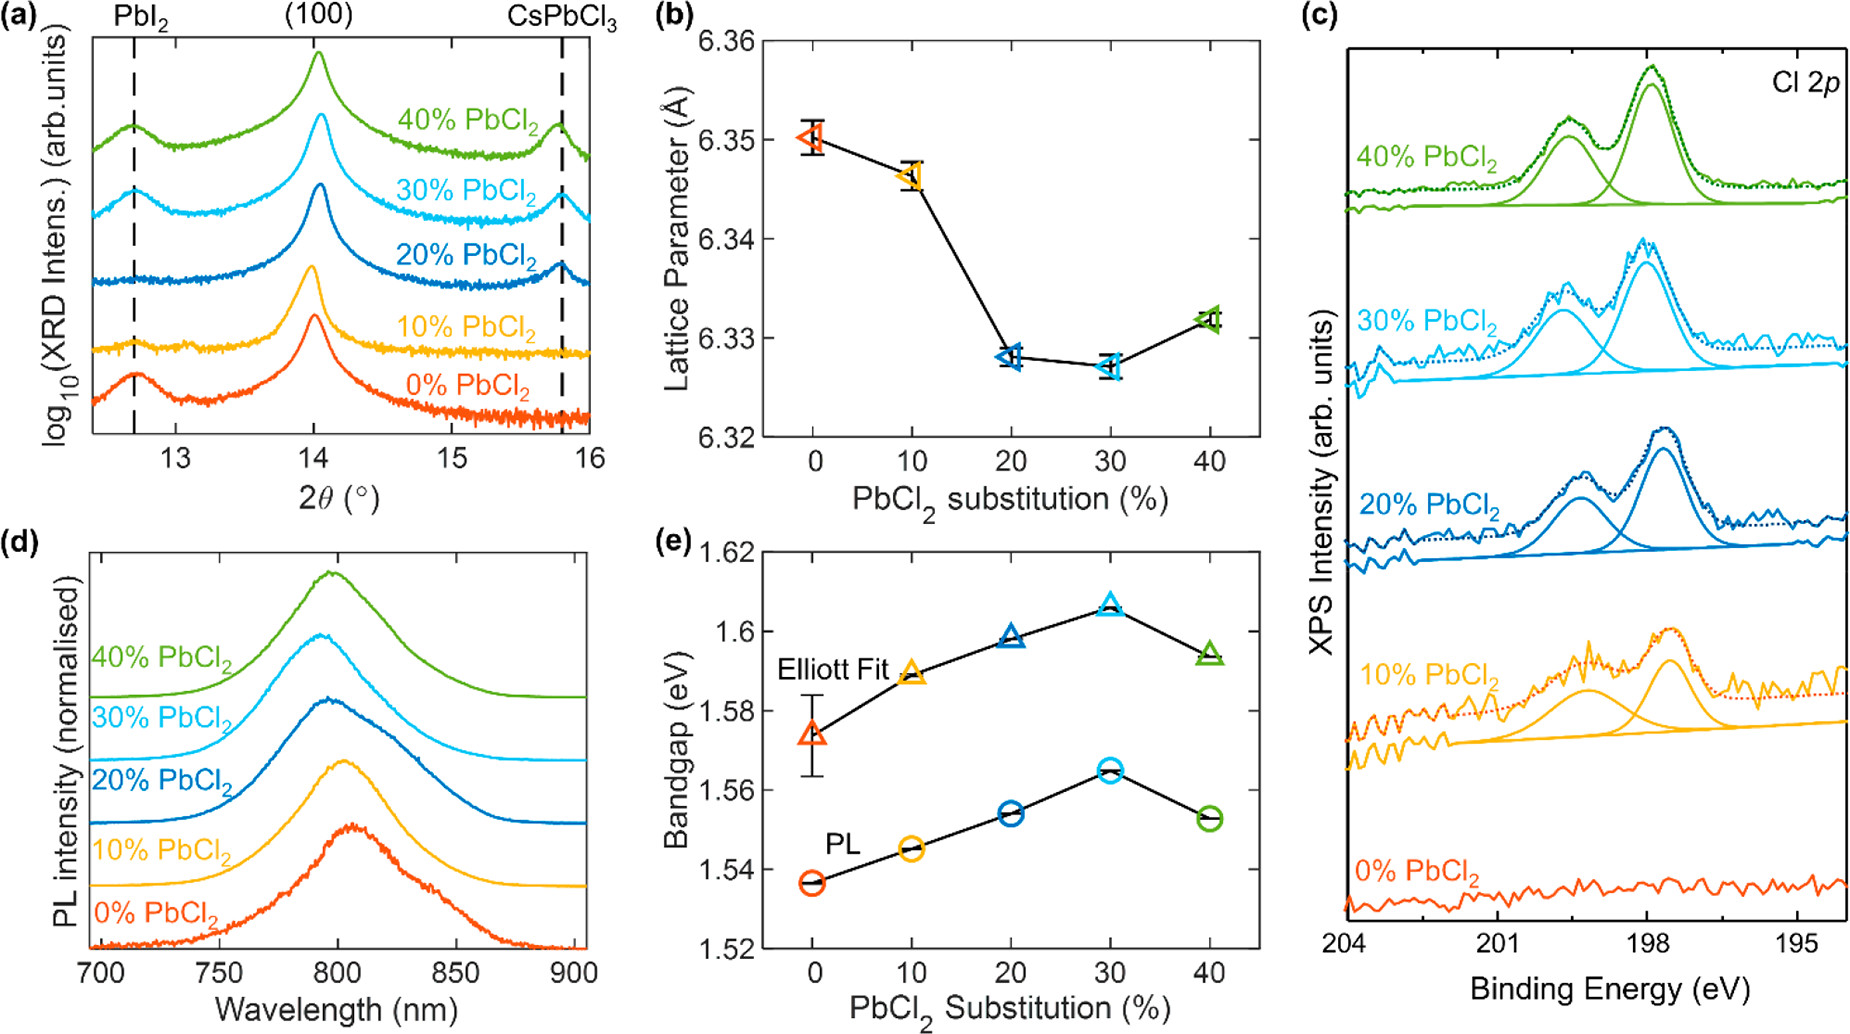 Evidence for incorporation of Cl into bulk FA1–yCsyPb(I1–xClx)3 perovskite. (a) X-ray diffraction patterns of FA1–yCsyPb(I1–xClx)3 full photovoltaic devices after testing, grown with varying amounts of PbI2 substituted for PbCl2, as depicted in the legend. The y-axis shows the logarithm of the measured intensity to be able to show both the large perovskite peak and the much smaller PbI2 and CsPbCl3 peaks. The XRD patterns were acquired with a Cu–Ka 1.54 Å X-ray source. (b) Lattice parameter obtained from the XRD traces in part a for the bulk perovskite fitted to a cubic unit cell. (c) X-ray photoemission (XPS) high-resolution spectra for thin films of the aforementioned compositions deposited on ITO/PTAA, showing the Cl 2p region. (d) Normalized photoluminescence (PL) of the aforementioned bare films on quartz after photoexcitation at 470 nm. (e) Optical bandgap obtained from fits to the PL and electronic bandgap obtained from Elliot fits to the absorption spectra shown in Figure S10 for the aforementioned bare films on quartz. The error bars in parts b and e represent the 1 standard deviation range (68% confidence interval) for the respective fit parameters.